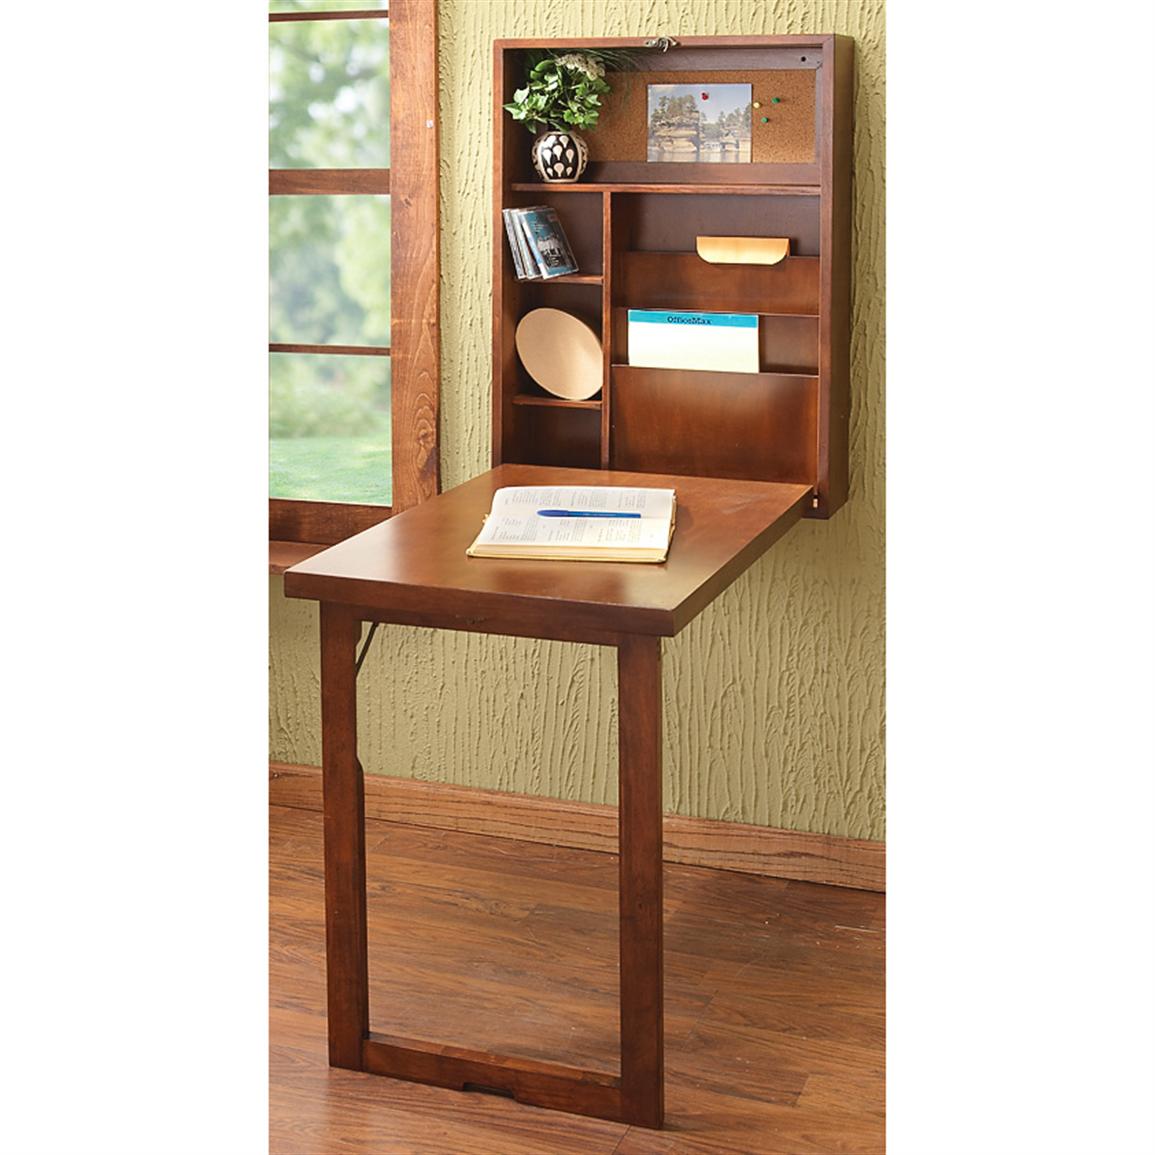 Leo Fold Out Convertible Desk 207761 Office At Sportsman S Guide